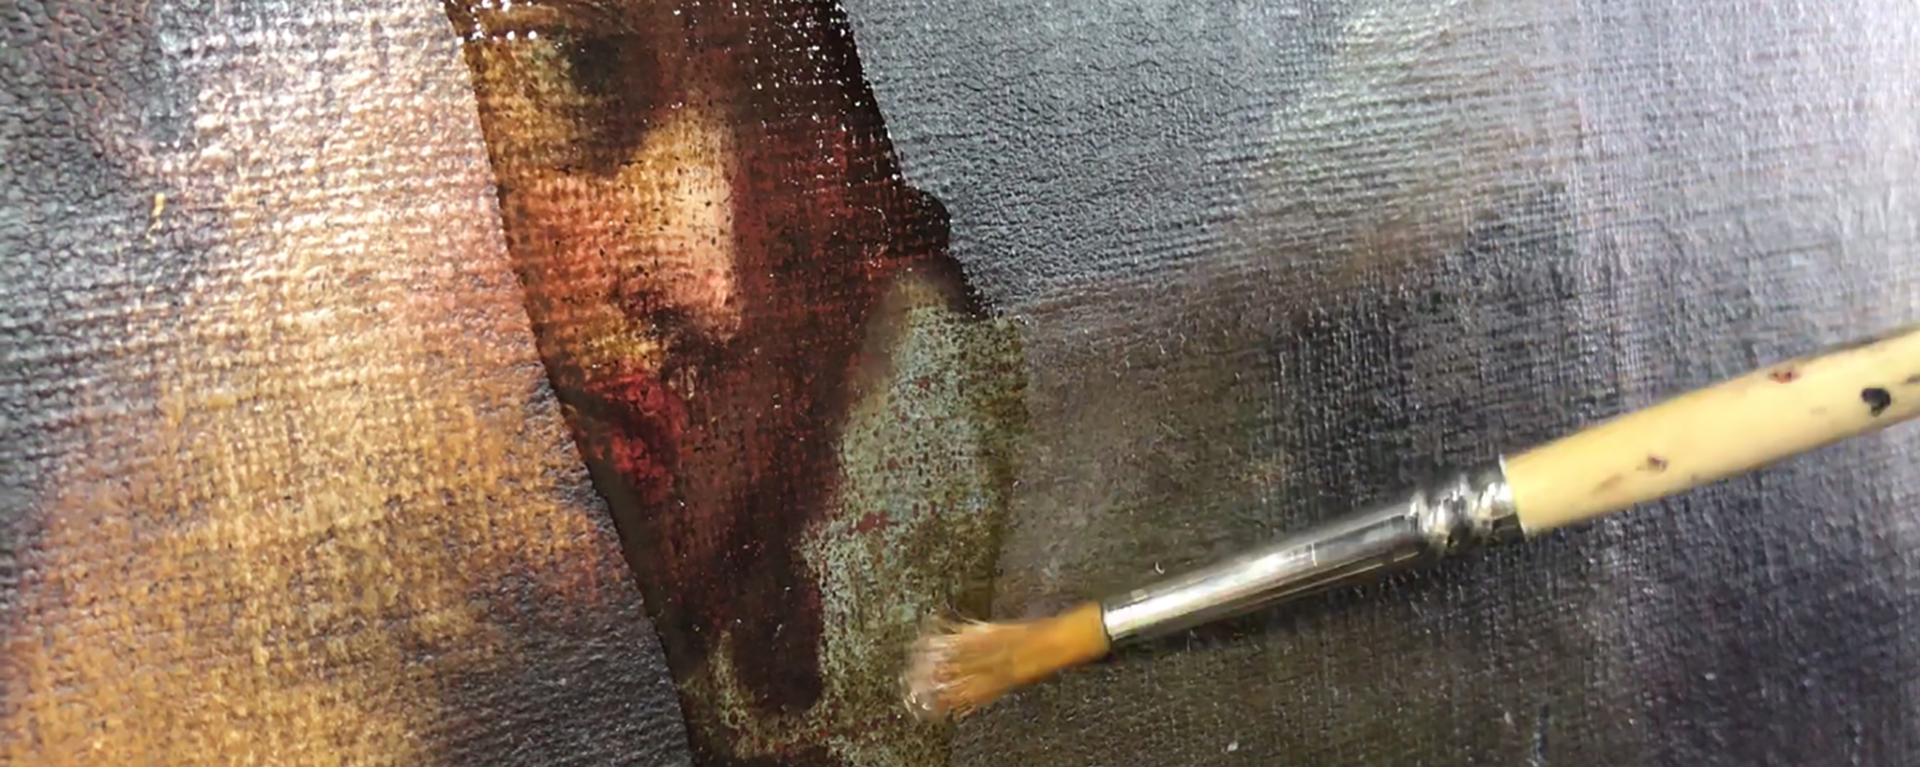  closeup photo of a paint brush cleaning a painting